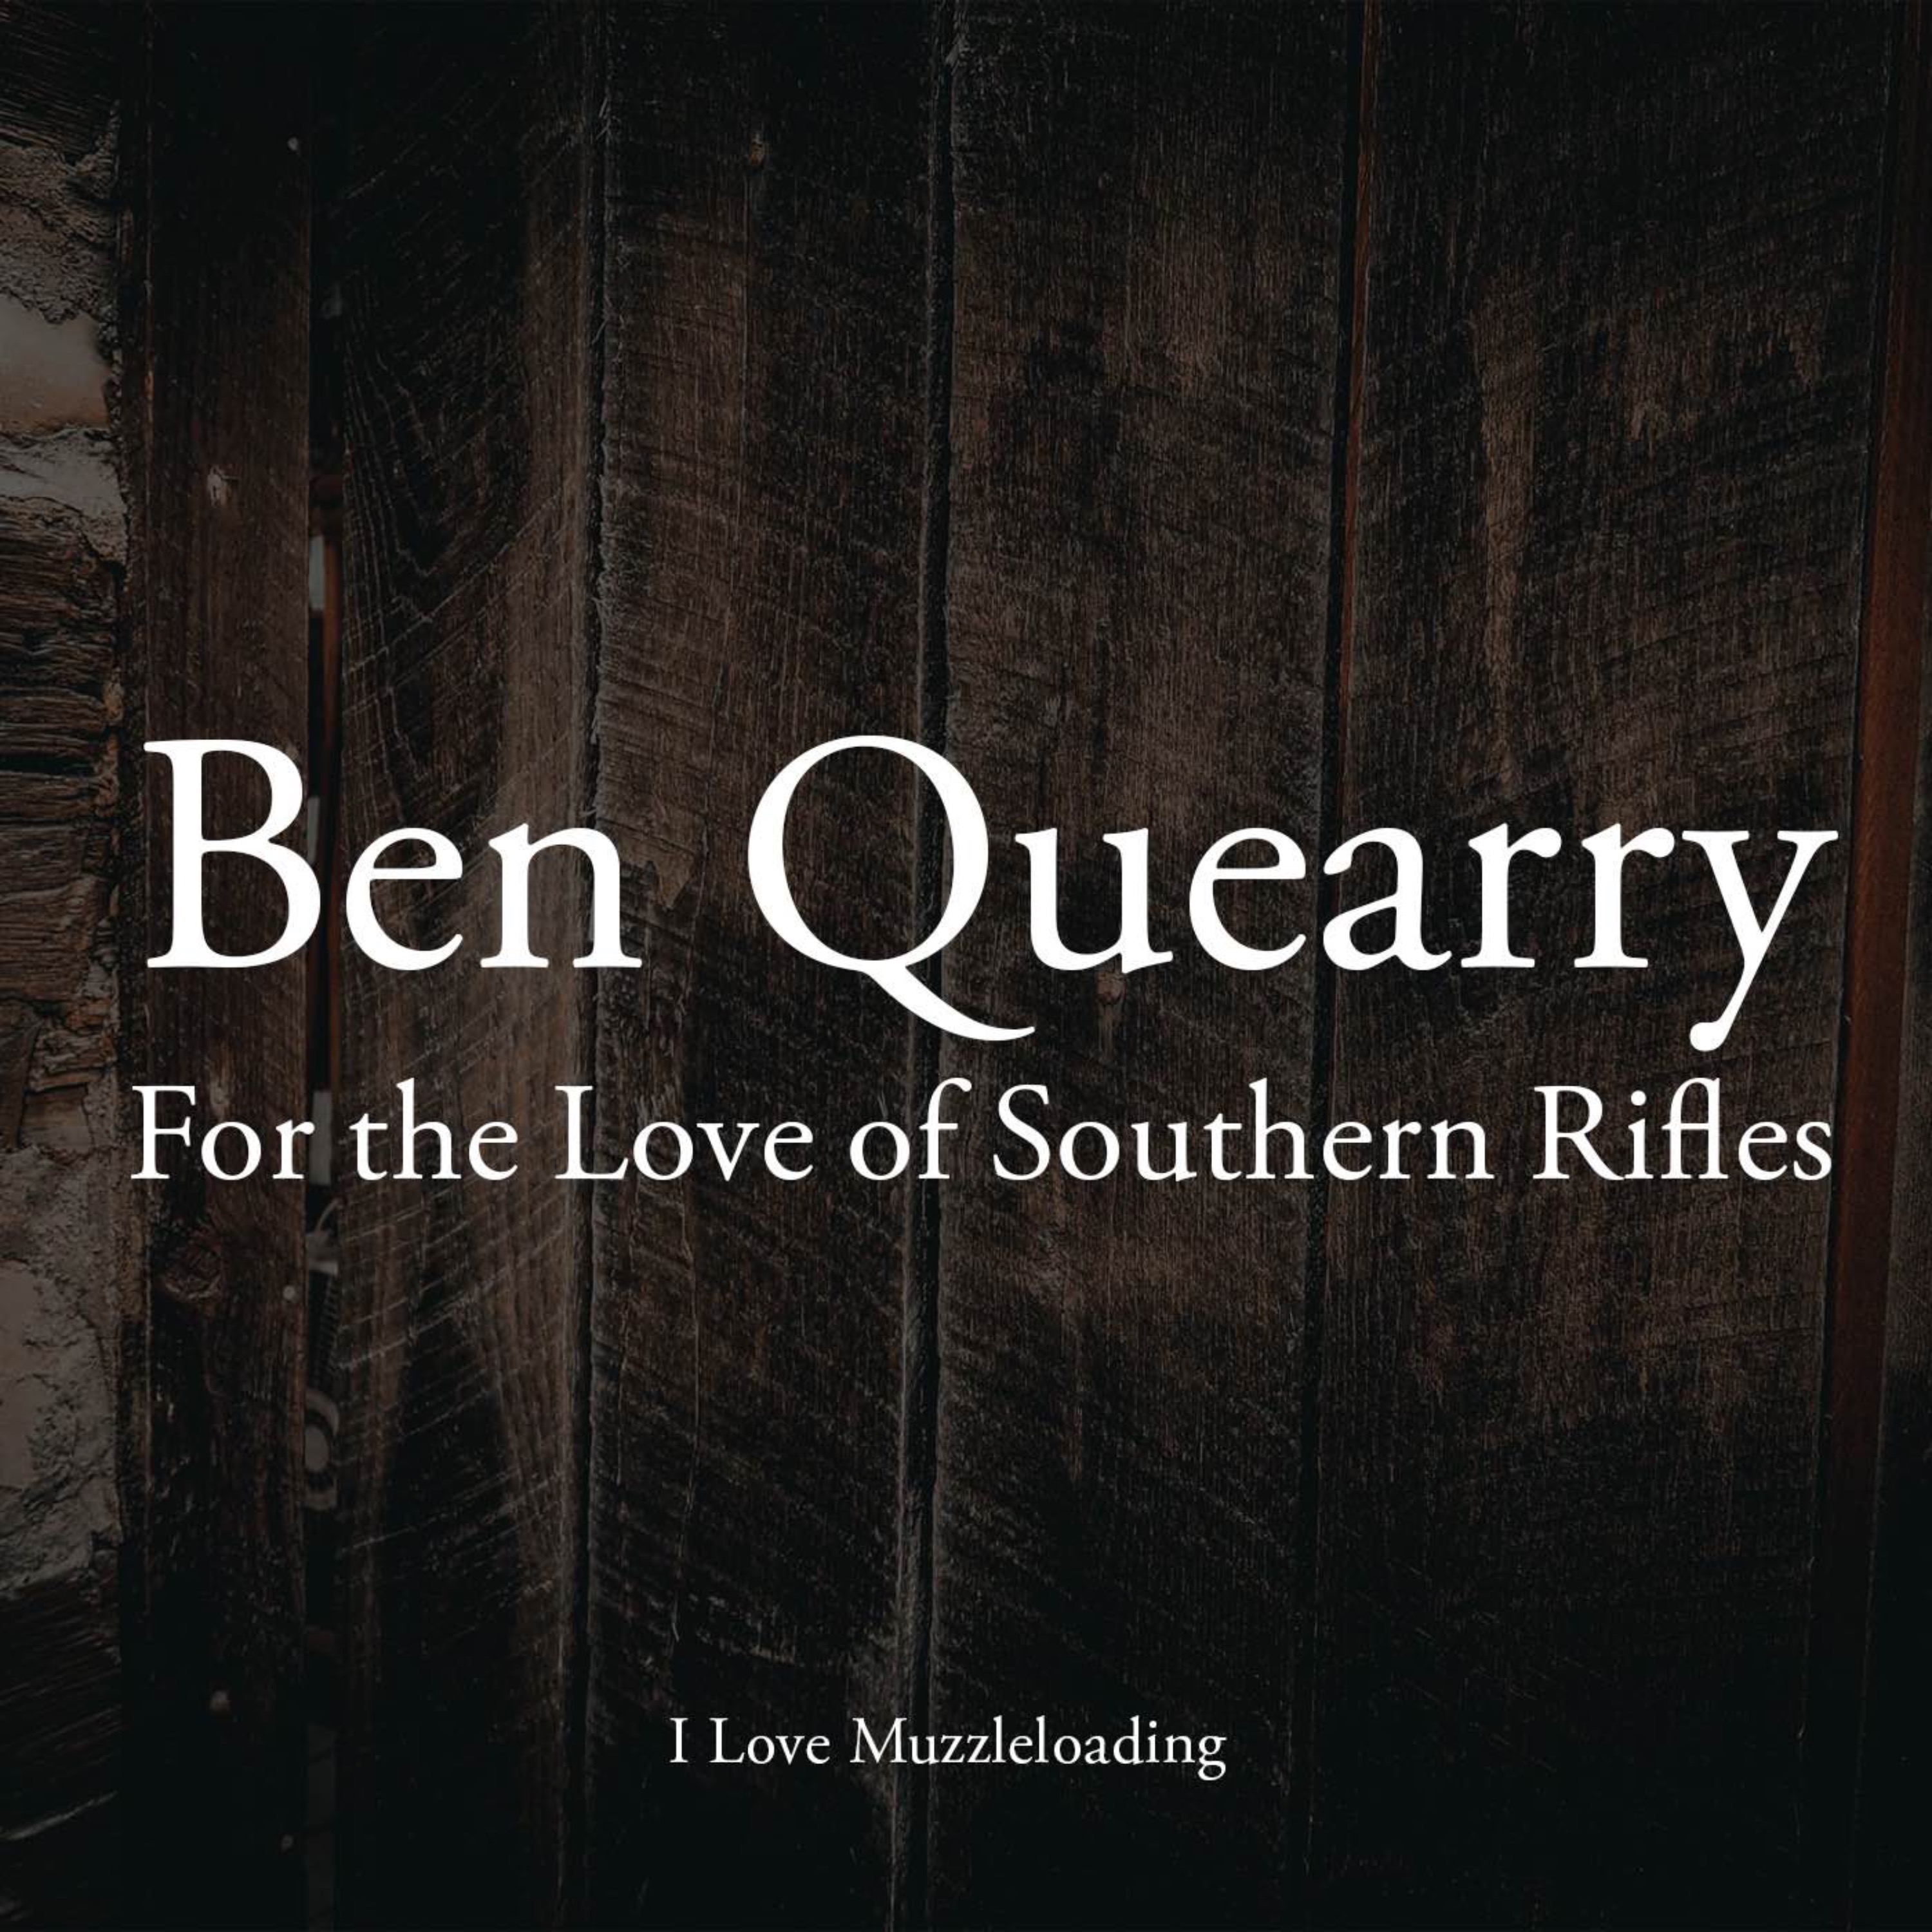 For the Love of Southern Rifles - A Conversation with Ben Quearry